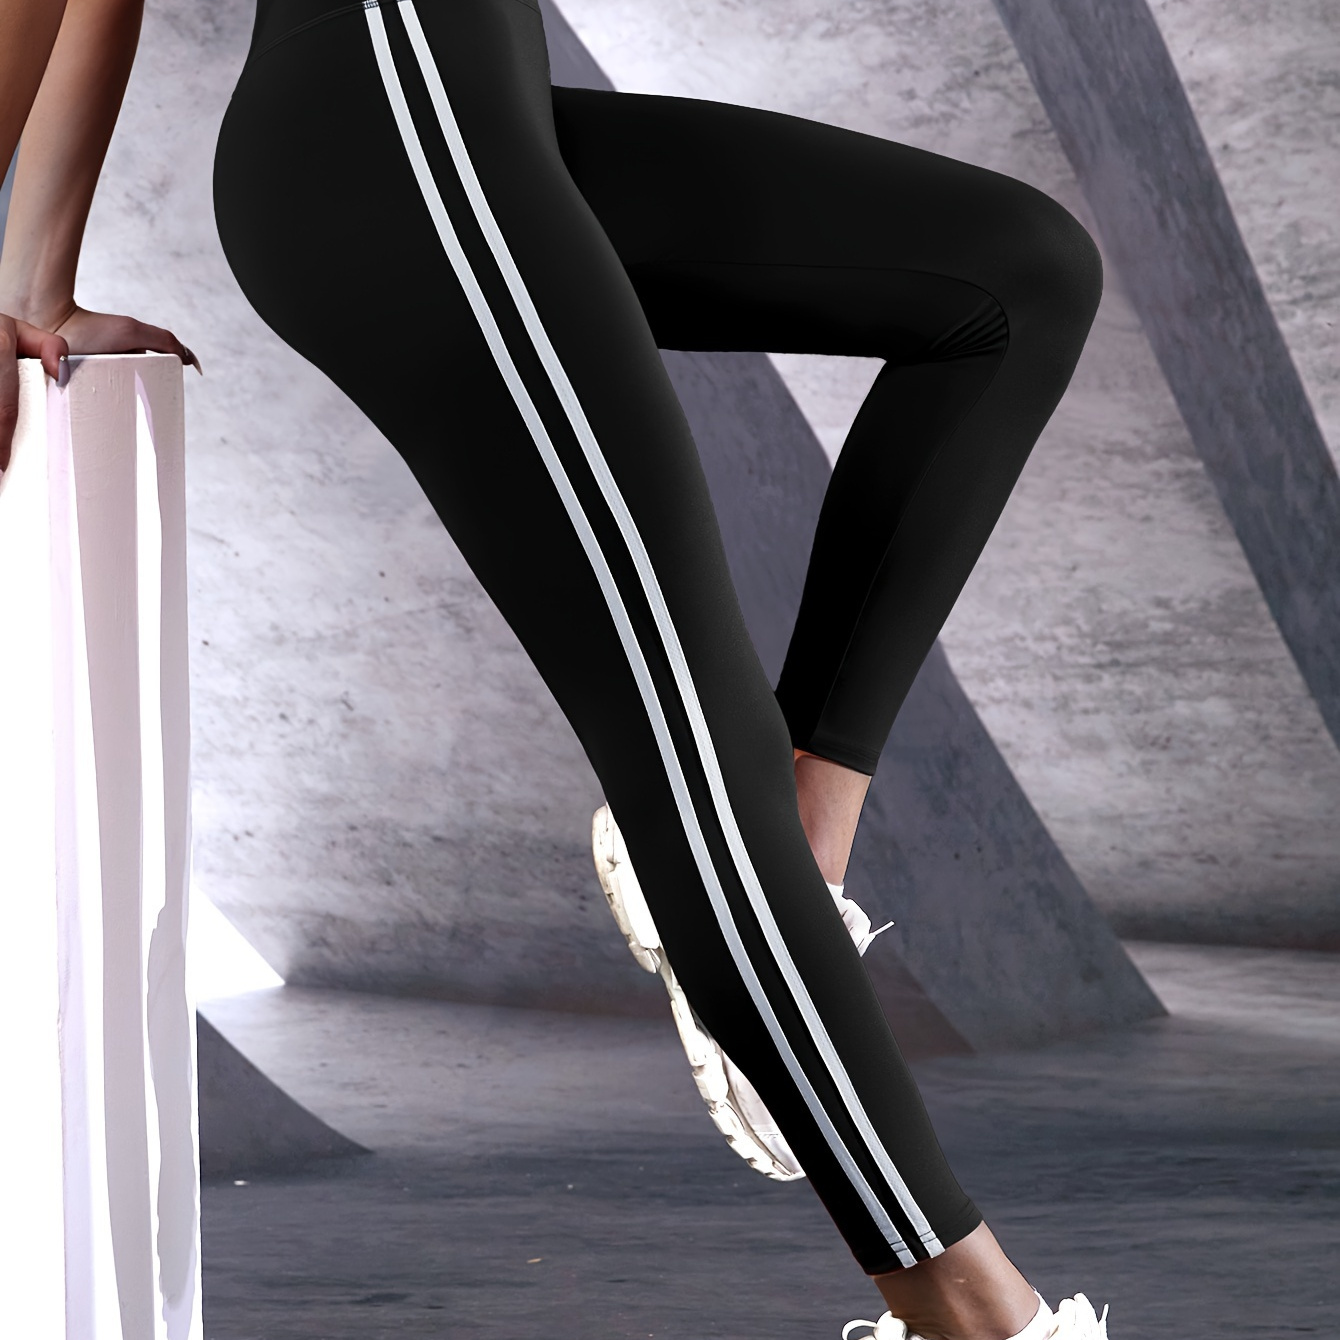 

Women's High Waist Yoga Pants With Side White Stripes, Stretchy Sports Cycling Tights, Comfortable Activewear Leggings - For Fall & Winter Wide Waistband